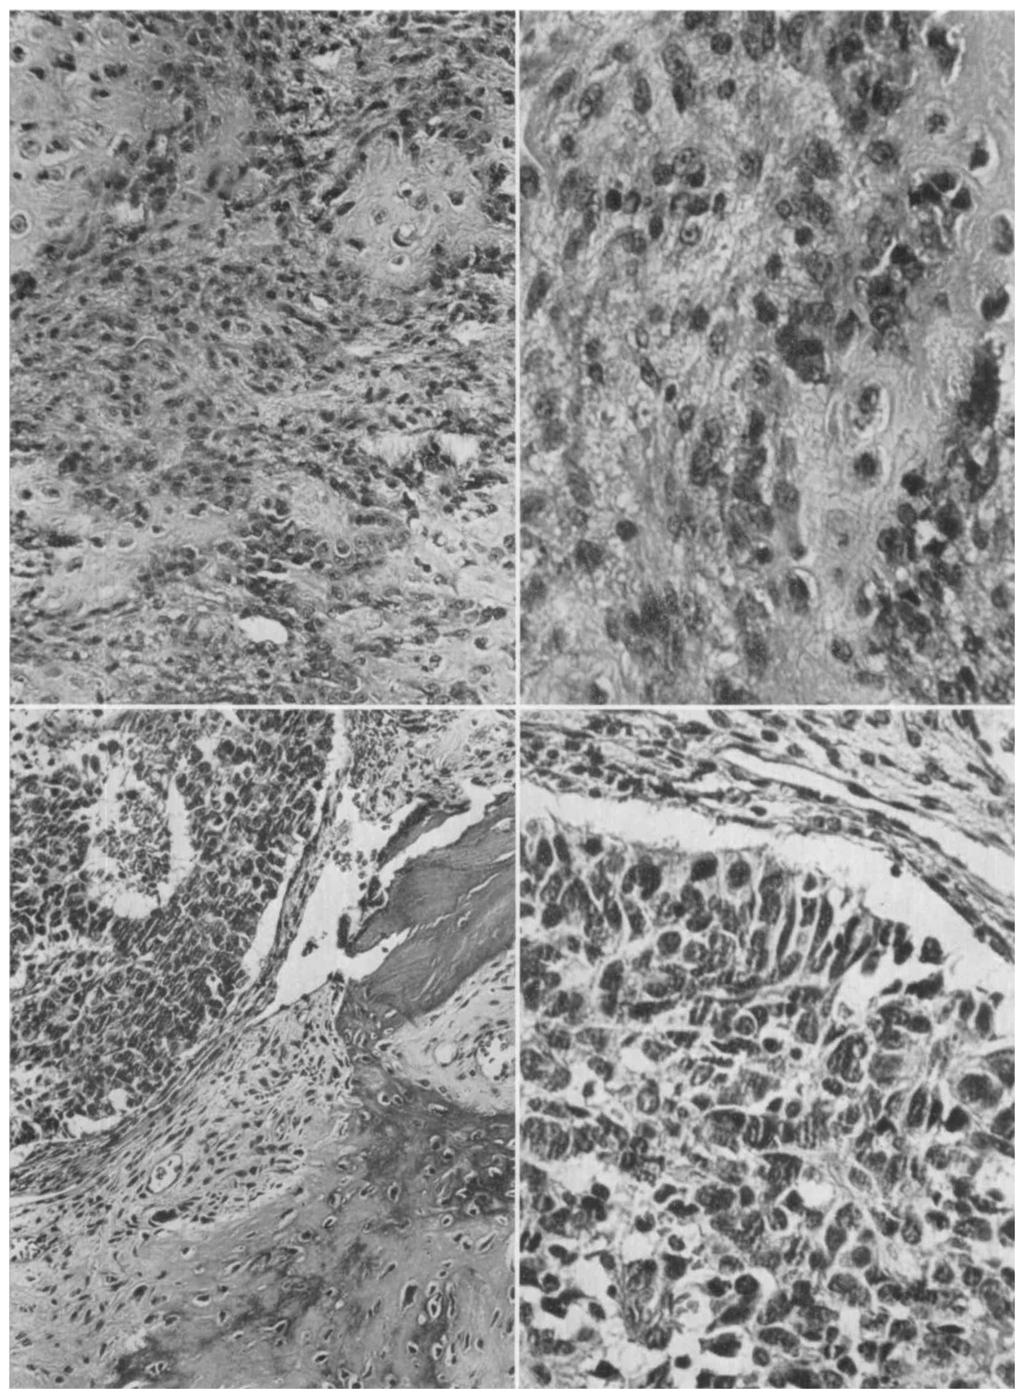 67-9900.) FIG. 21 (upper right). Case 4. The cellularity and pleomorphism of the cells in the fracture callus from Case 4 are shown at higher magnification. Hematoxylin and eosin. X 350. (W.U.